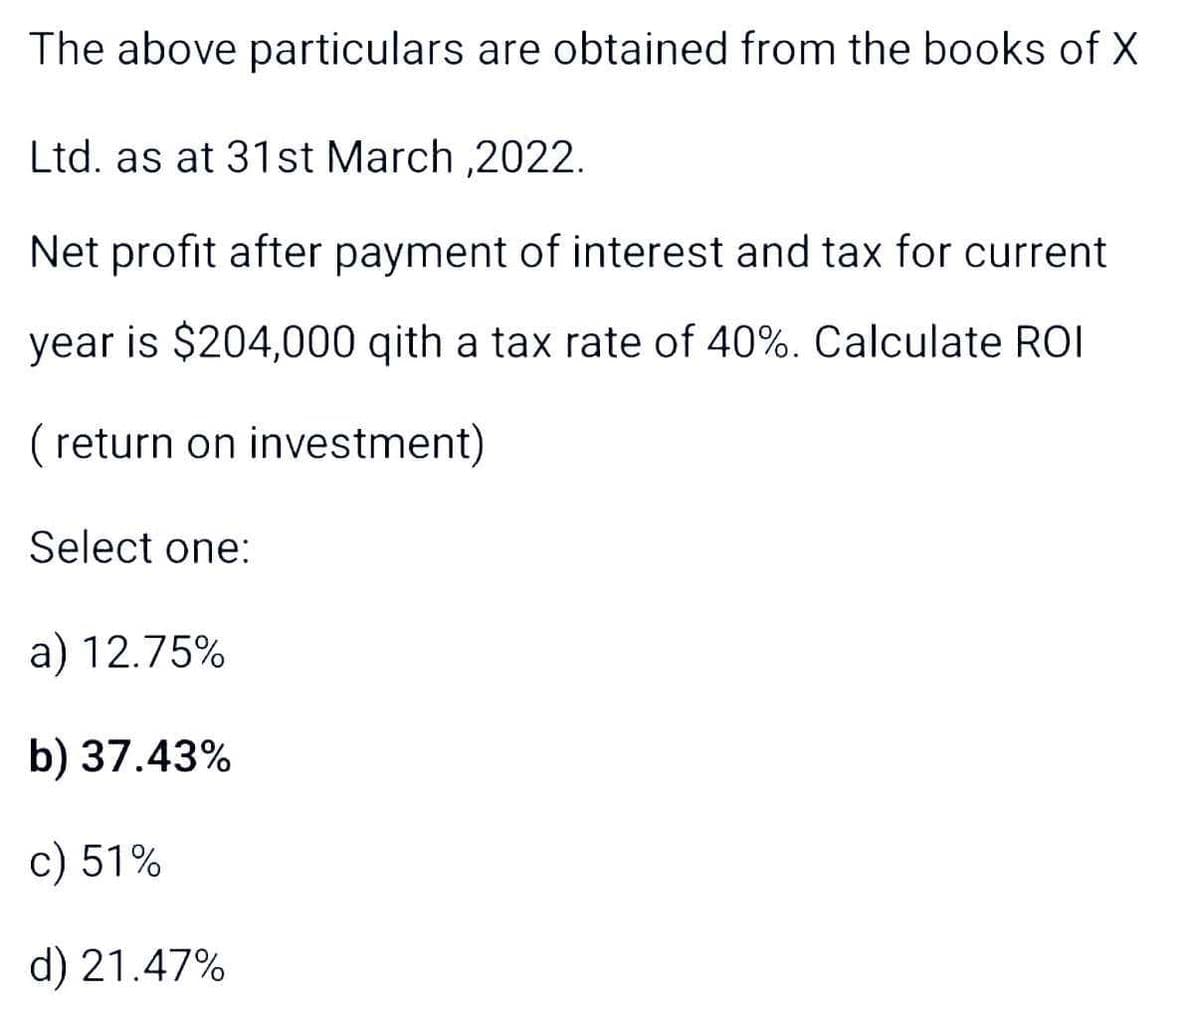 The above particulars are obtained from the books of X
Ltd. as at 31st March,2022.
Net profit after payment of interest and tax for current
year is $204,000 qith a tax rate of 40%. Calculate ROI
(return on investment)
Select one:
a) 12.75%
b) 37.43%
c) 51%
d) 21.47%